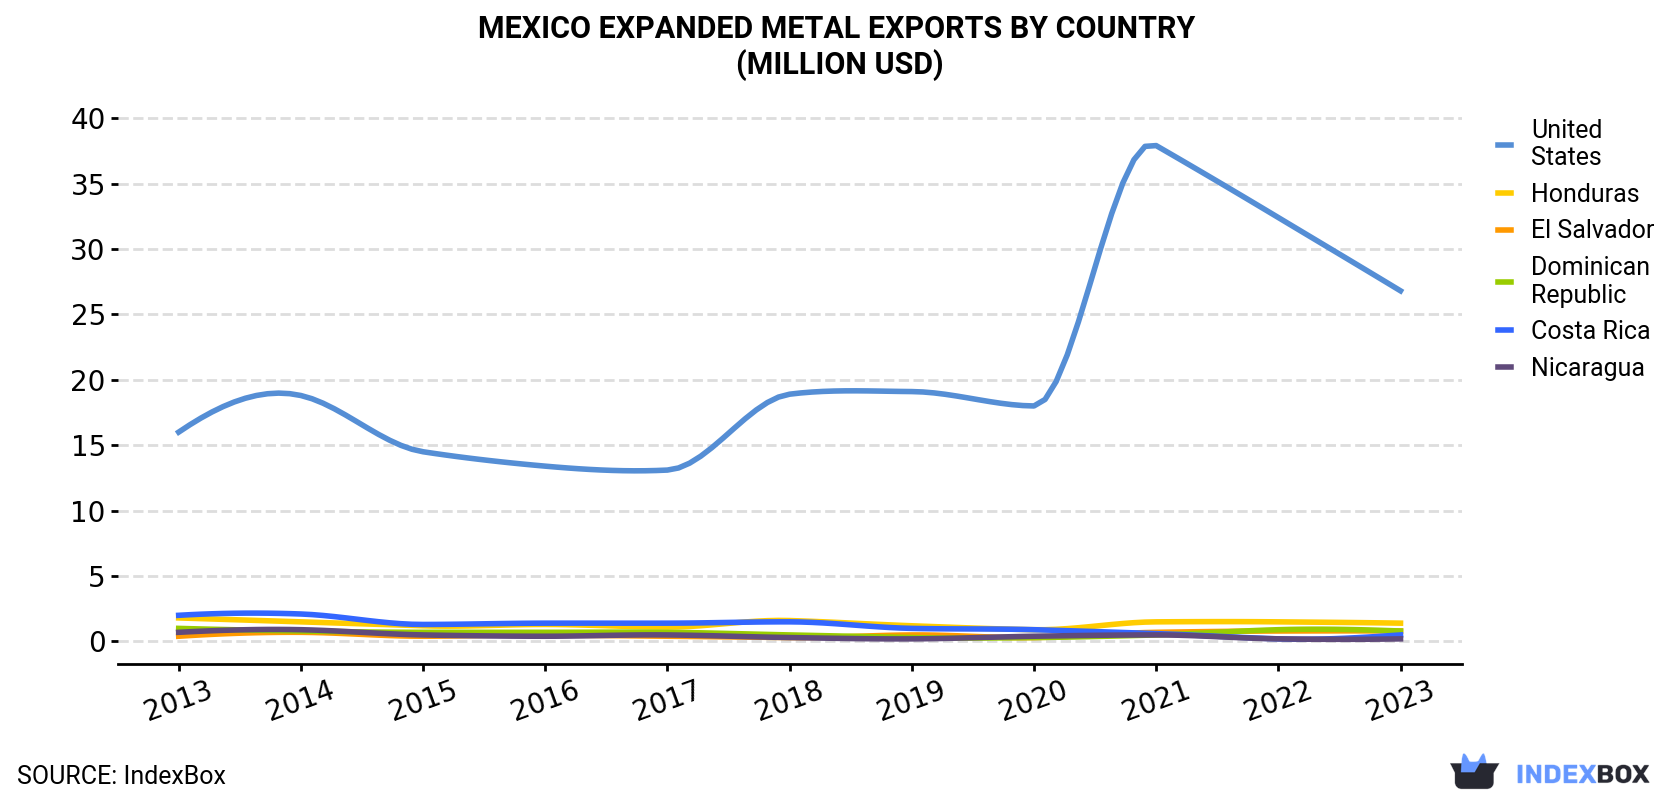 Mexico Expanded Metal Exports By Country (Million USD)